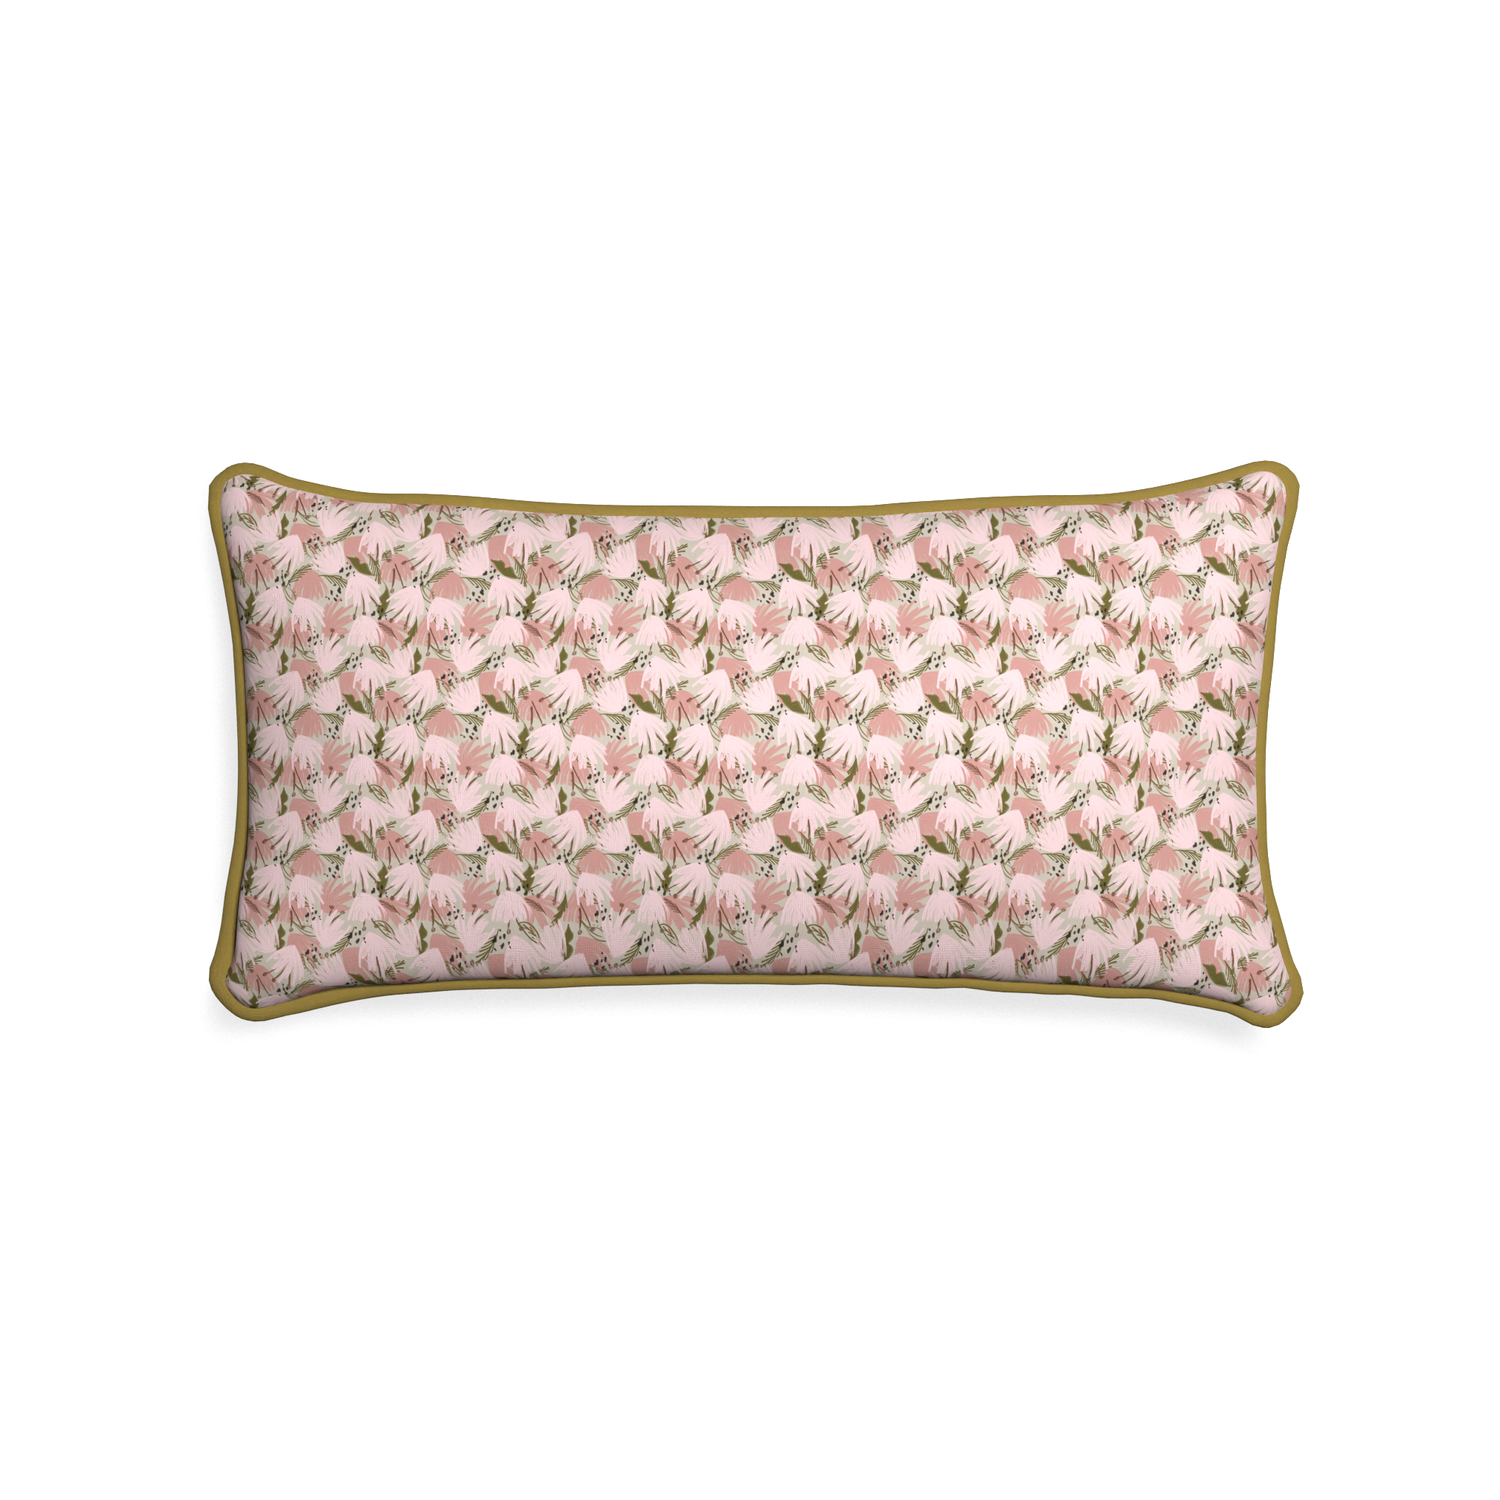 Midi-lumbar eden pink custom pink floralpillow with c piping on white background